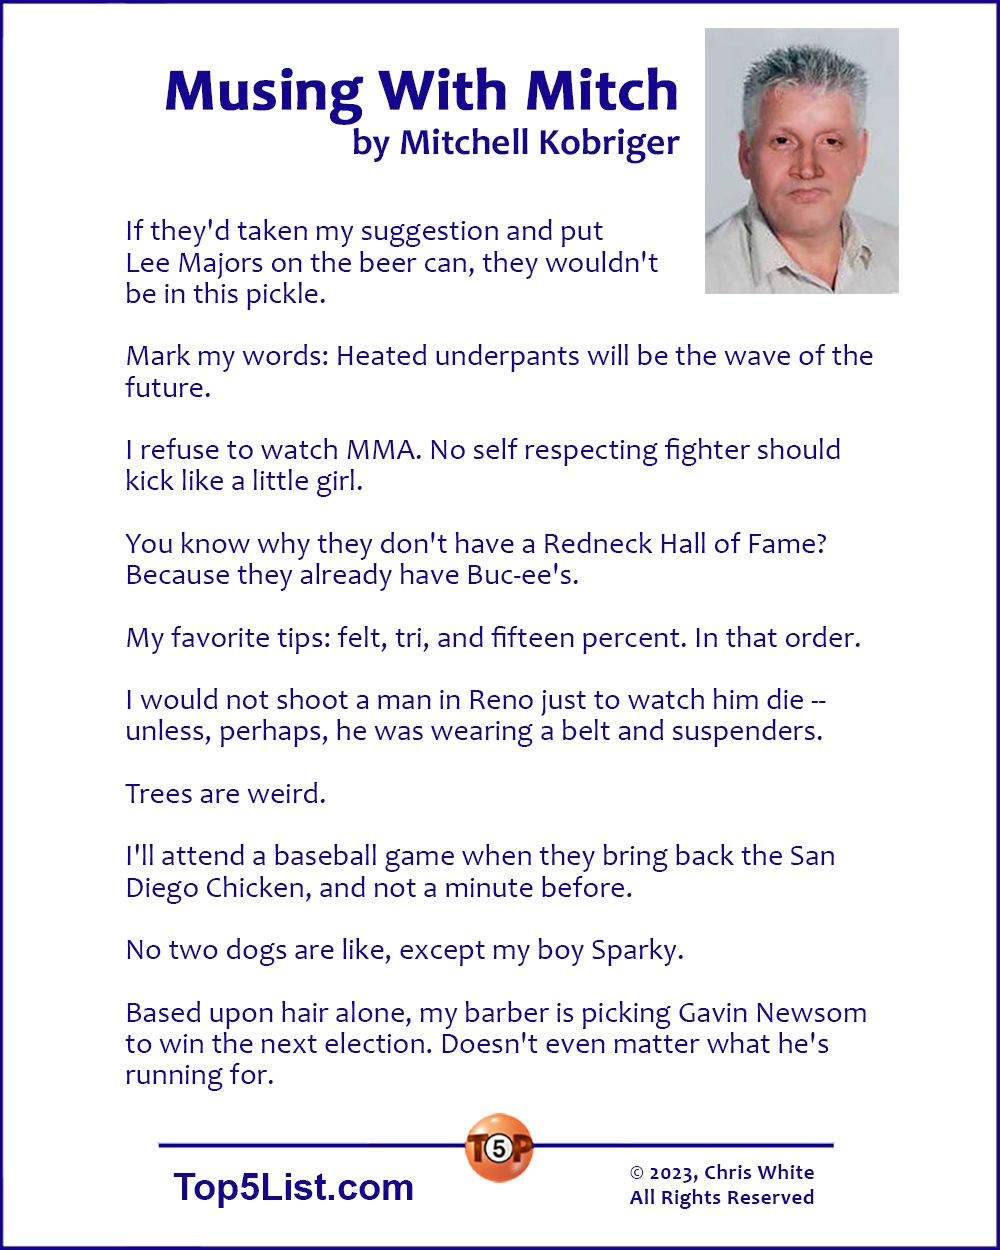 Musing With Mitch, by Mitchell Kobriger | If they'd taken my suggestion and put Lee Majors on the beer can, they wouldn't be in this pickle. Mark my words: Heated underpants will be the wave of the future. I refuse to watch MMA. No self respecting fighter should kick like a little girl. You know what they don't have a Redneck Hall of Fame? Because they already have Buc-ee's. My favorite tips: felt, tri, and fifteen percent. In that order. Trees are weird. I would not shoot a man in Reno just to watch him die -- unless, perhaps, he was wearing a belt and suspenders. No two dogs are like, except my boy Sparky. I'll attend a baseball game when they bring back the San Diego Chicken, and not a minute before. Based upon hair alone, my barber is picking Gavin Newsom to win the next election. Doesn't even matter what he's running for.